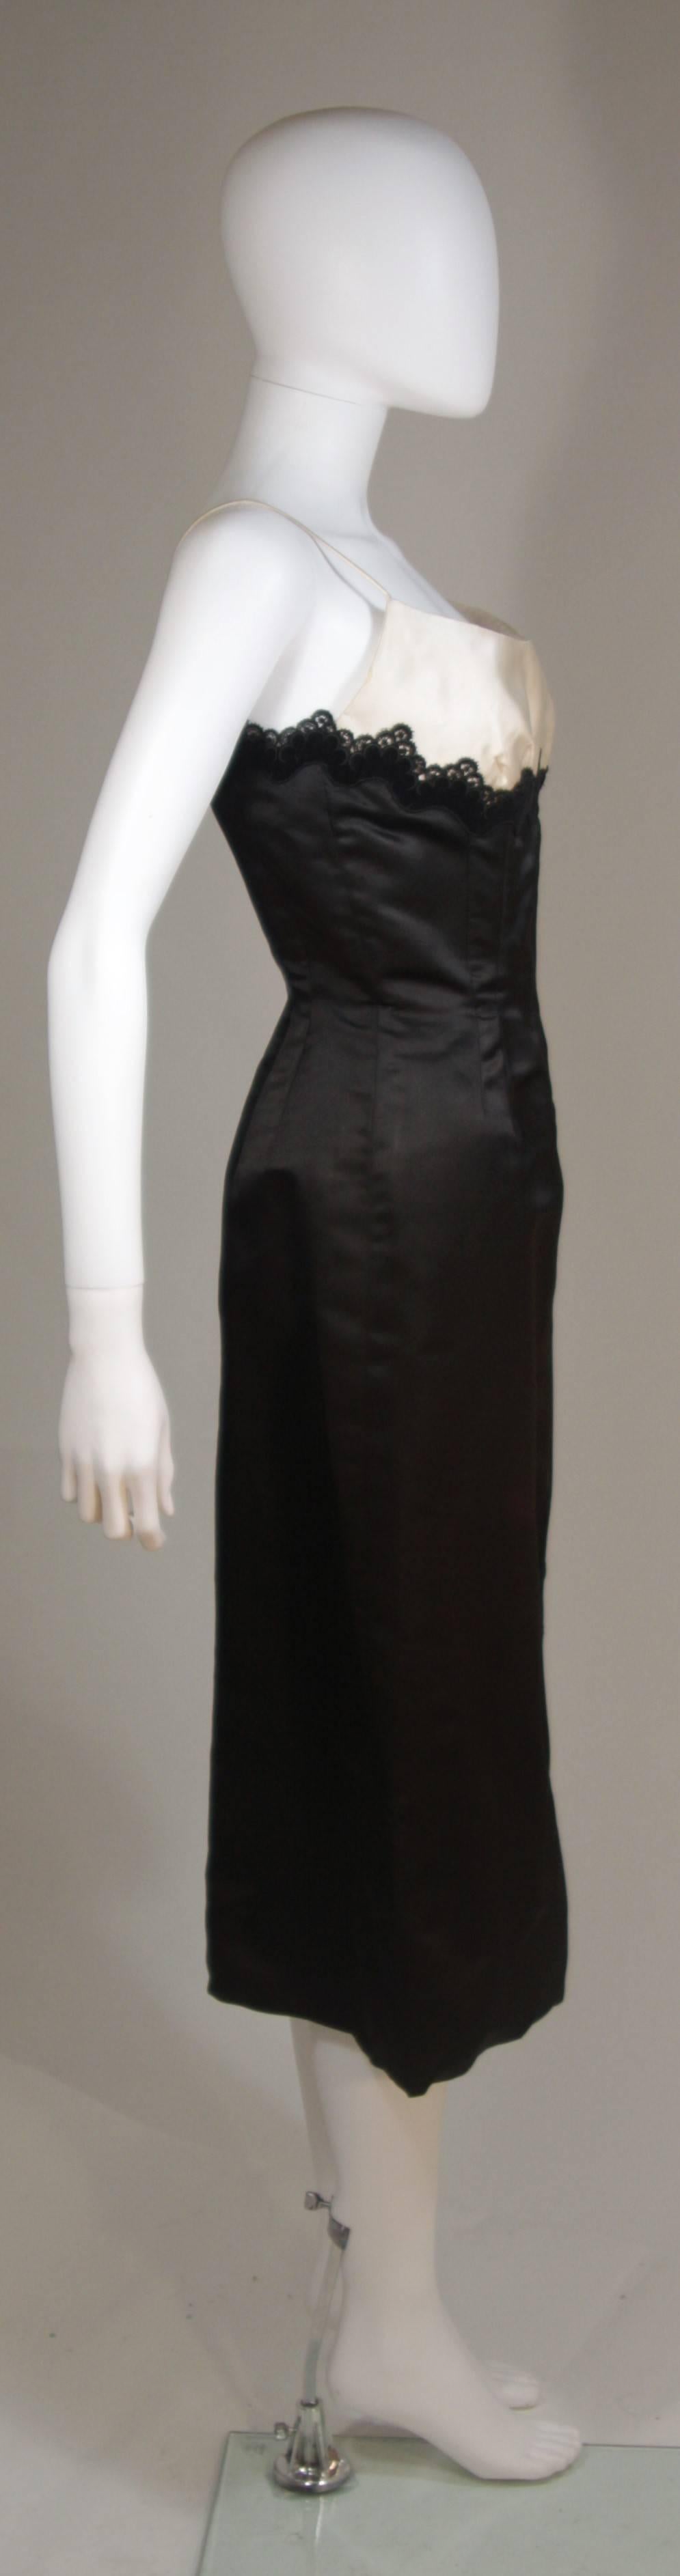 OLEG CASSINI Black and White Contrast Cocktail Dress with Lace Size 2-4 For Sale 1